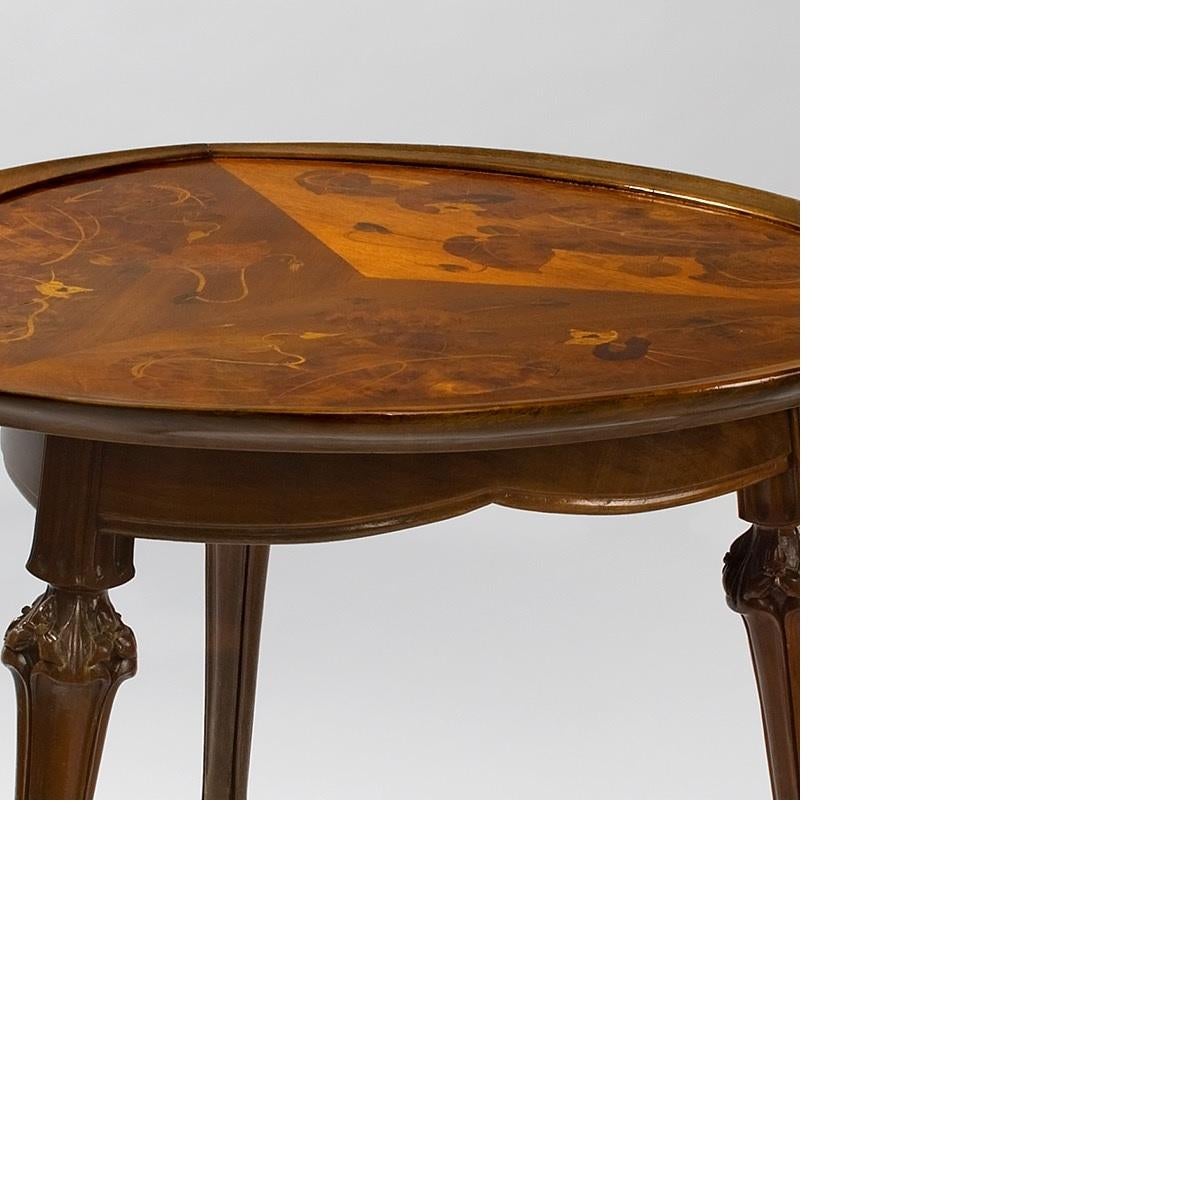 French Art Nouveau Table by Louis Majorelle In Excellent Condition For Sale In New York, NY